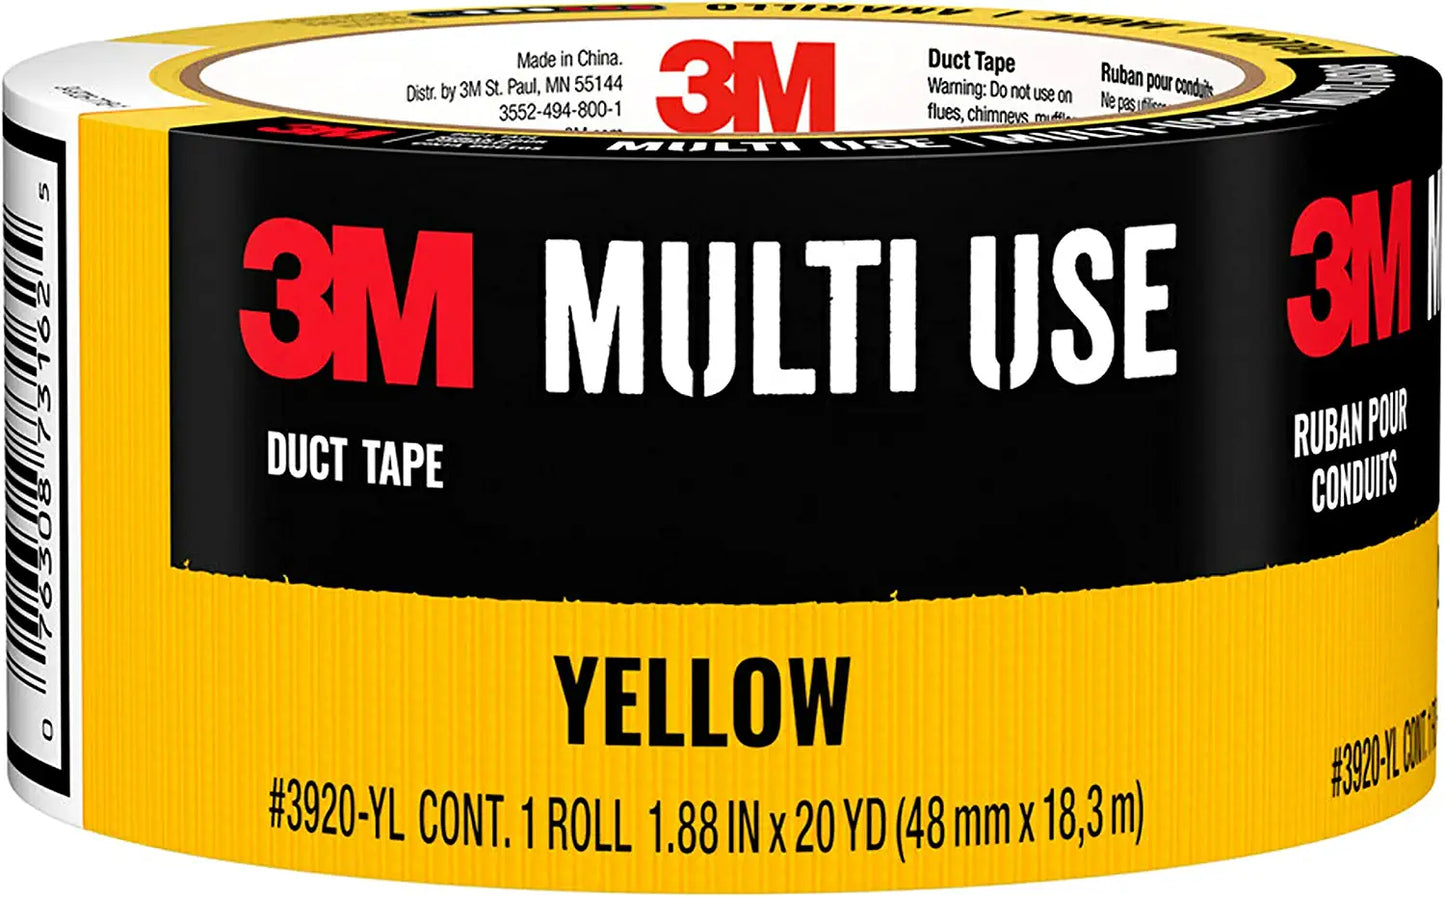 3M Multi-purpose Duct Tape, 20 Yards, Yellow Suitable for temporary repairs